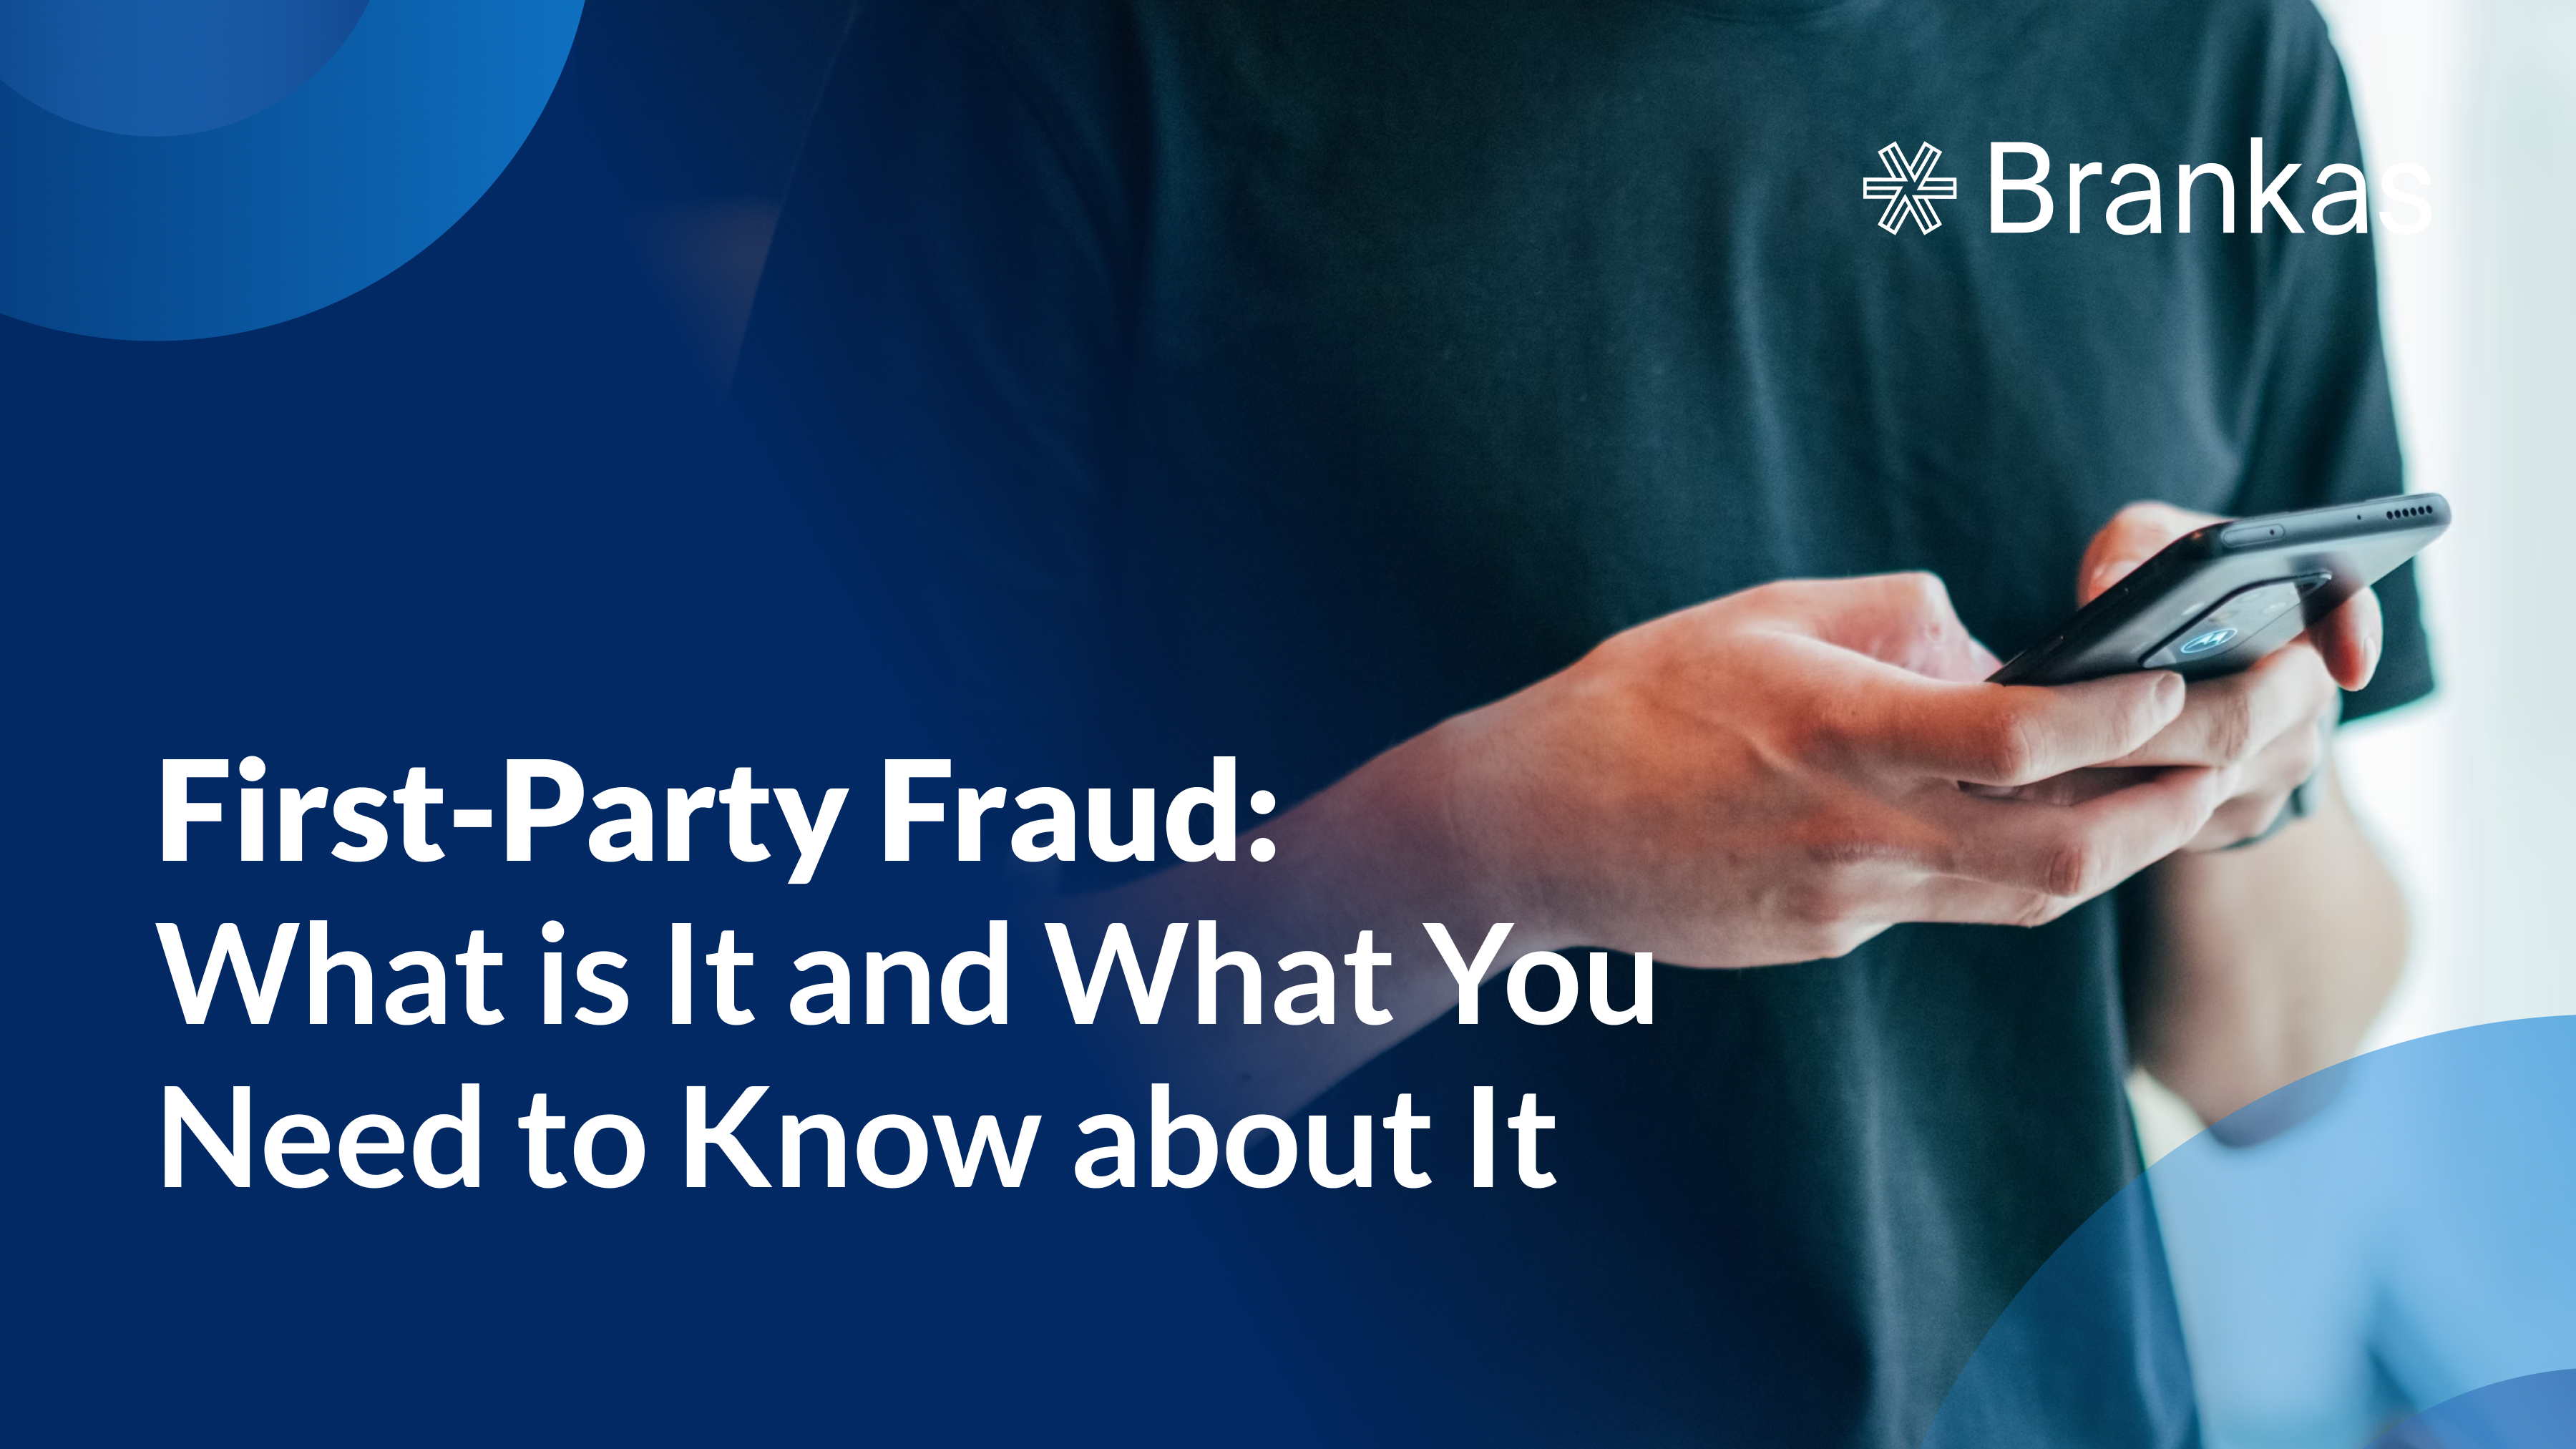 First-Party Fraud: What is It and What You Need to Know about It